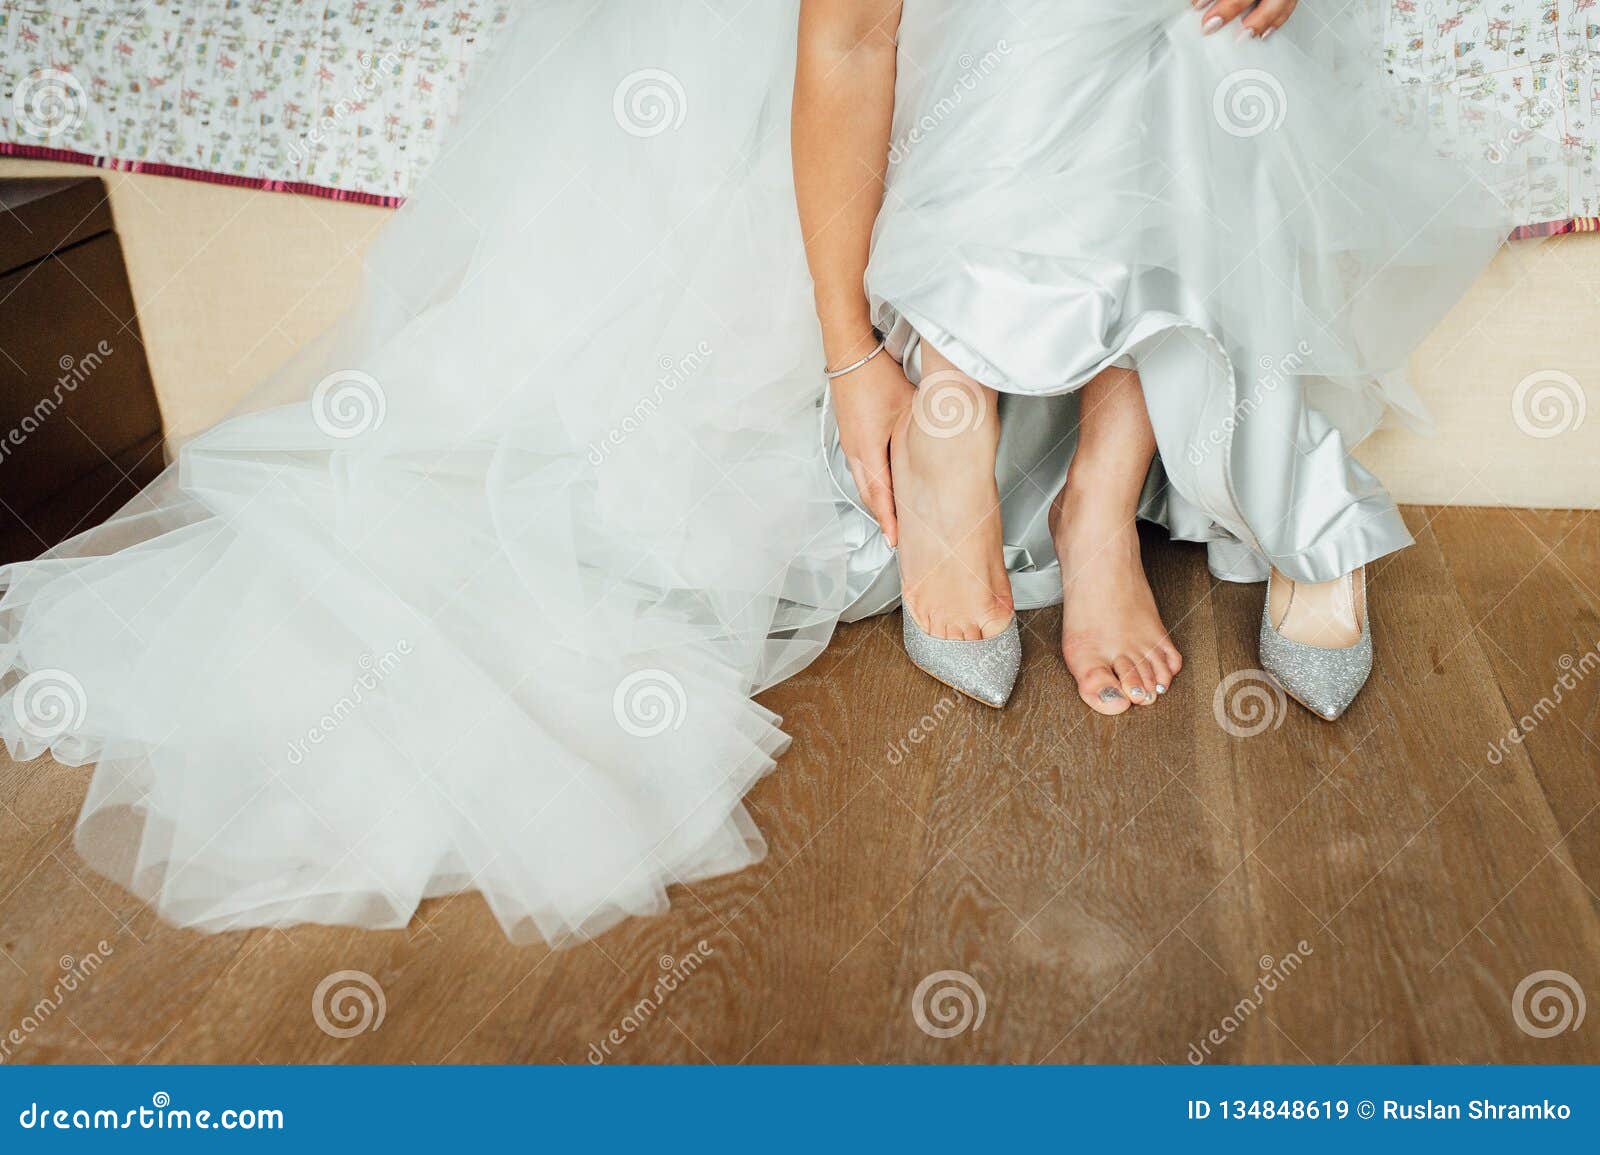 Beautiful and Athletic Legs of the Bride in Wedding Shoes Stock Image ...